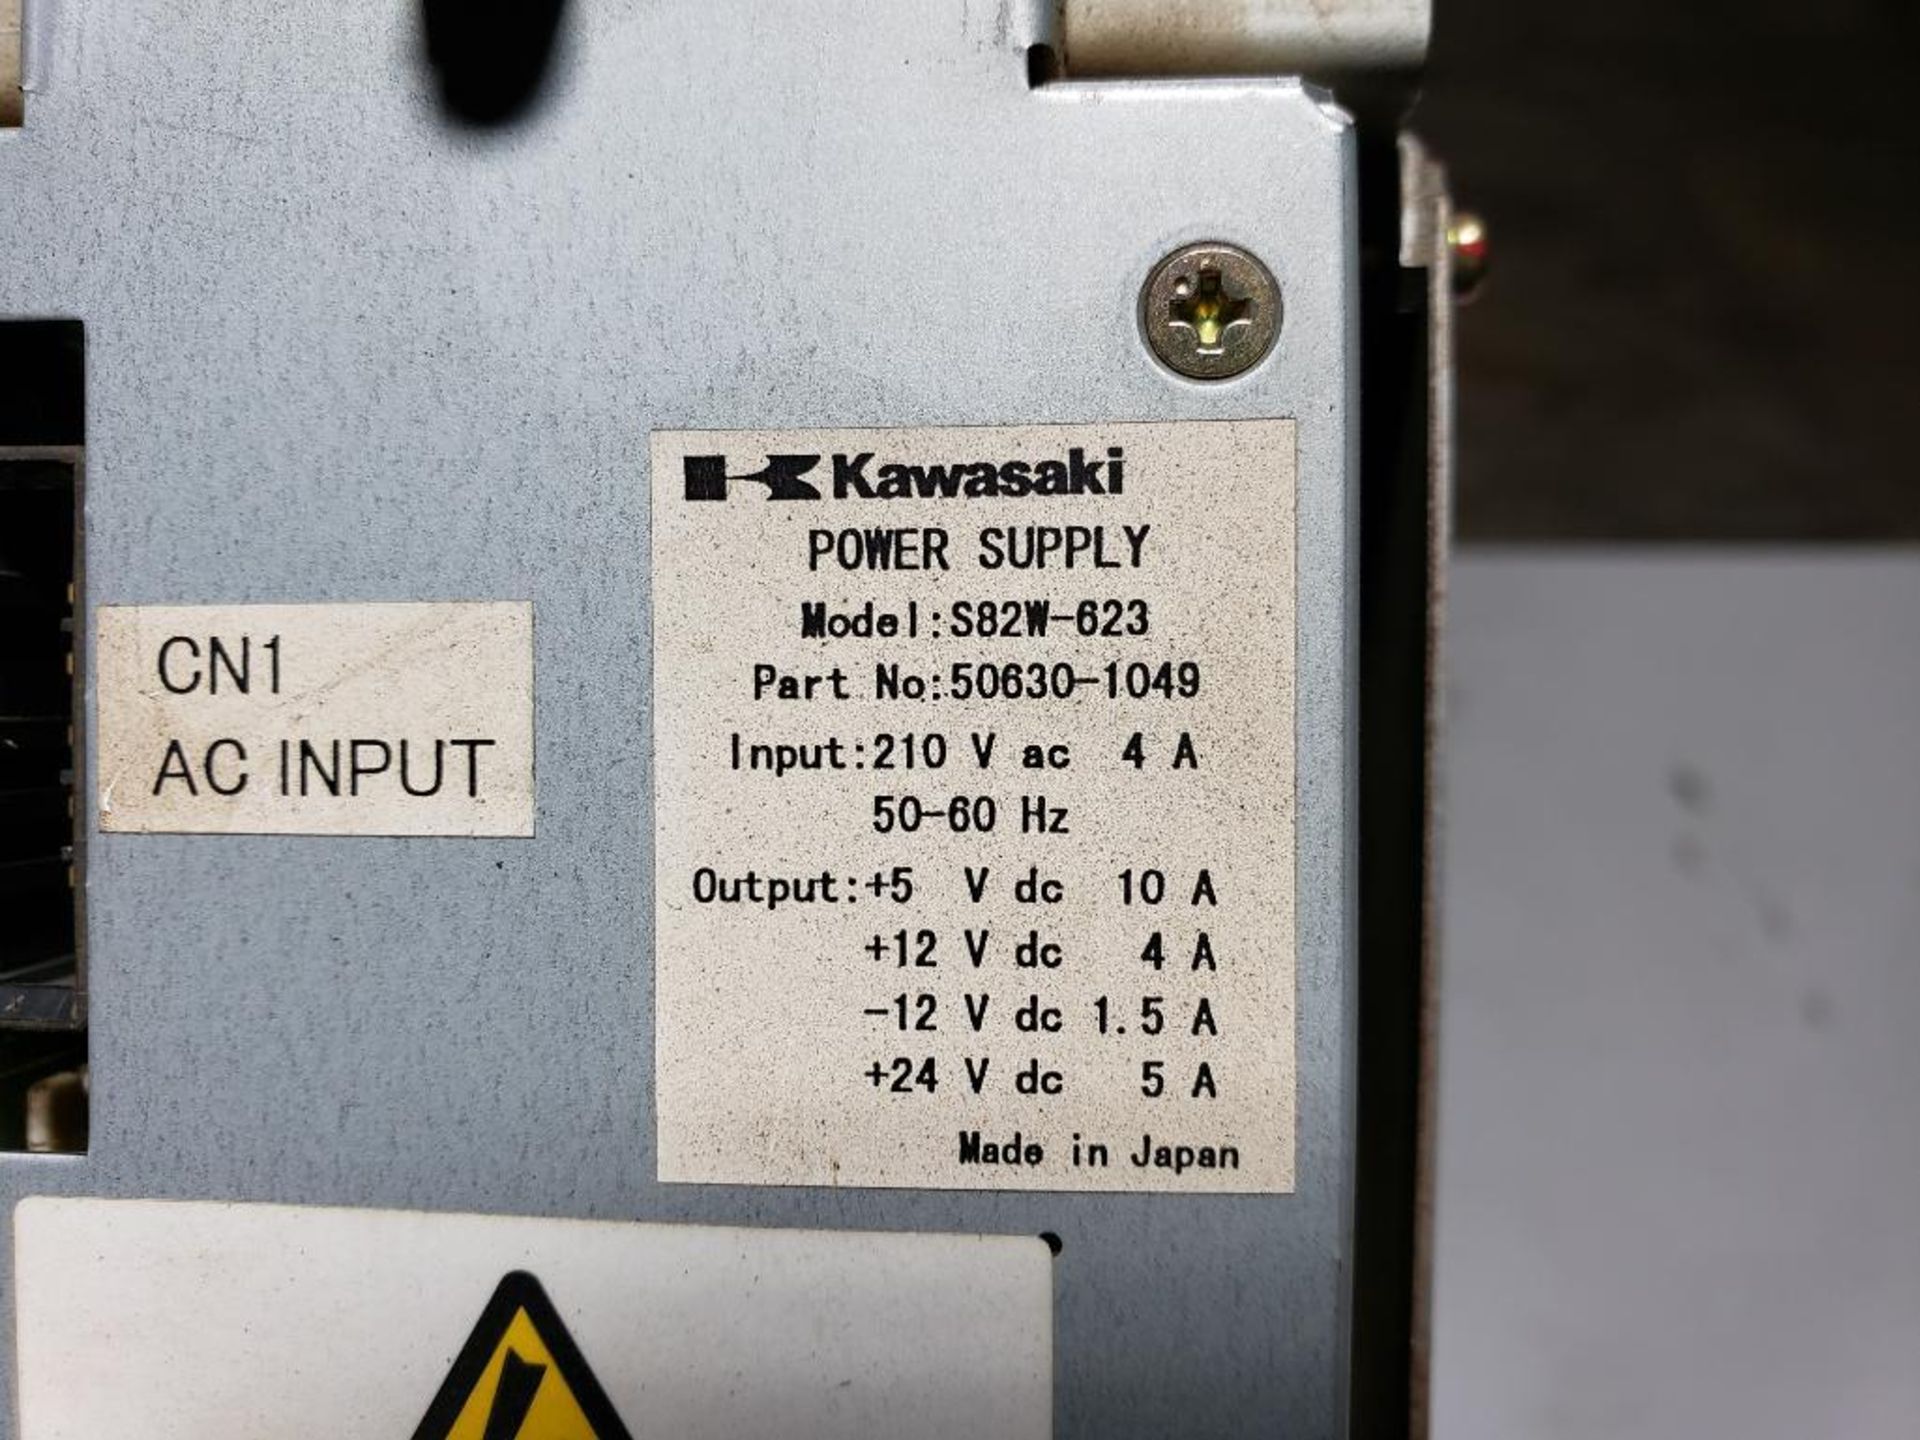 Kawasaki power supply and PLC. Model S82W-623. Part number 50630-1049. - Image 3 of 5